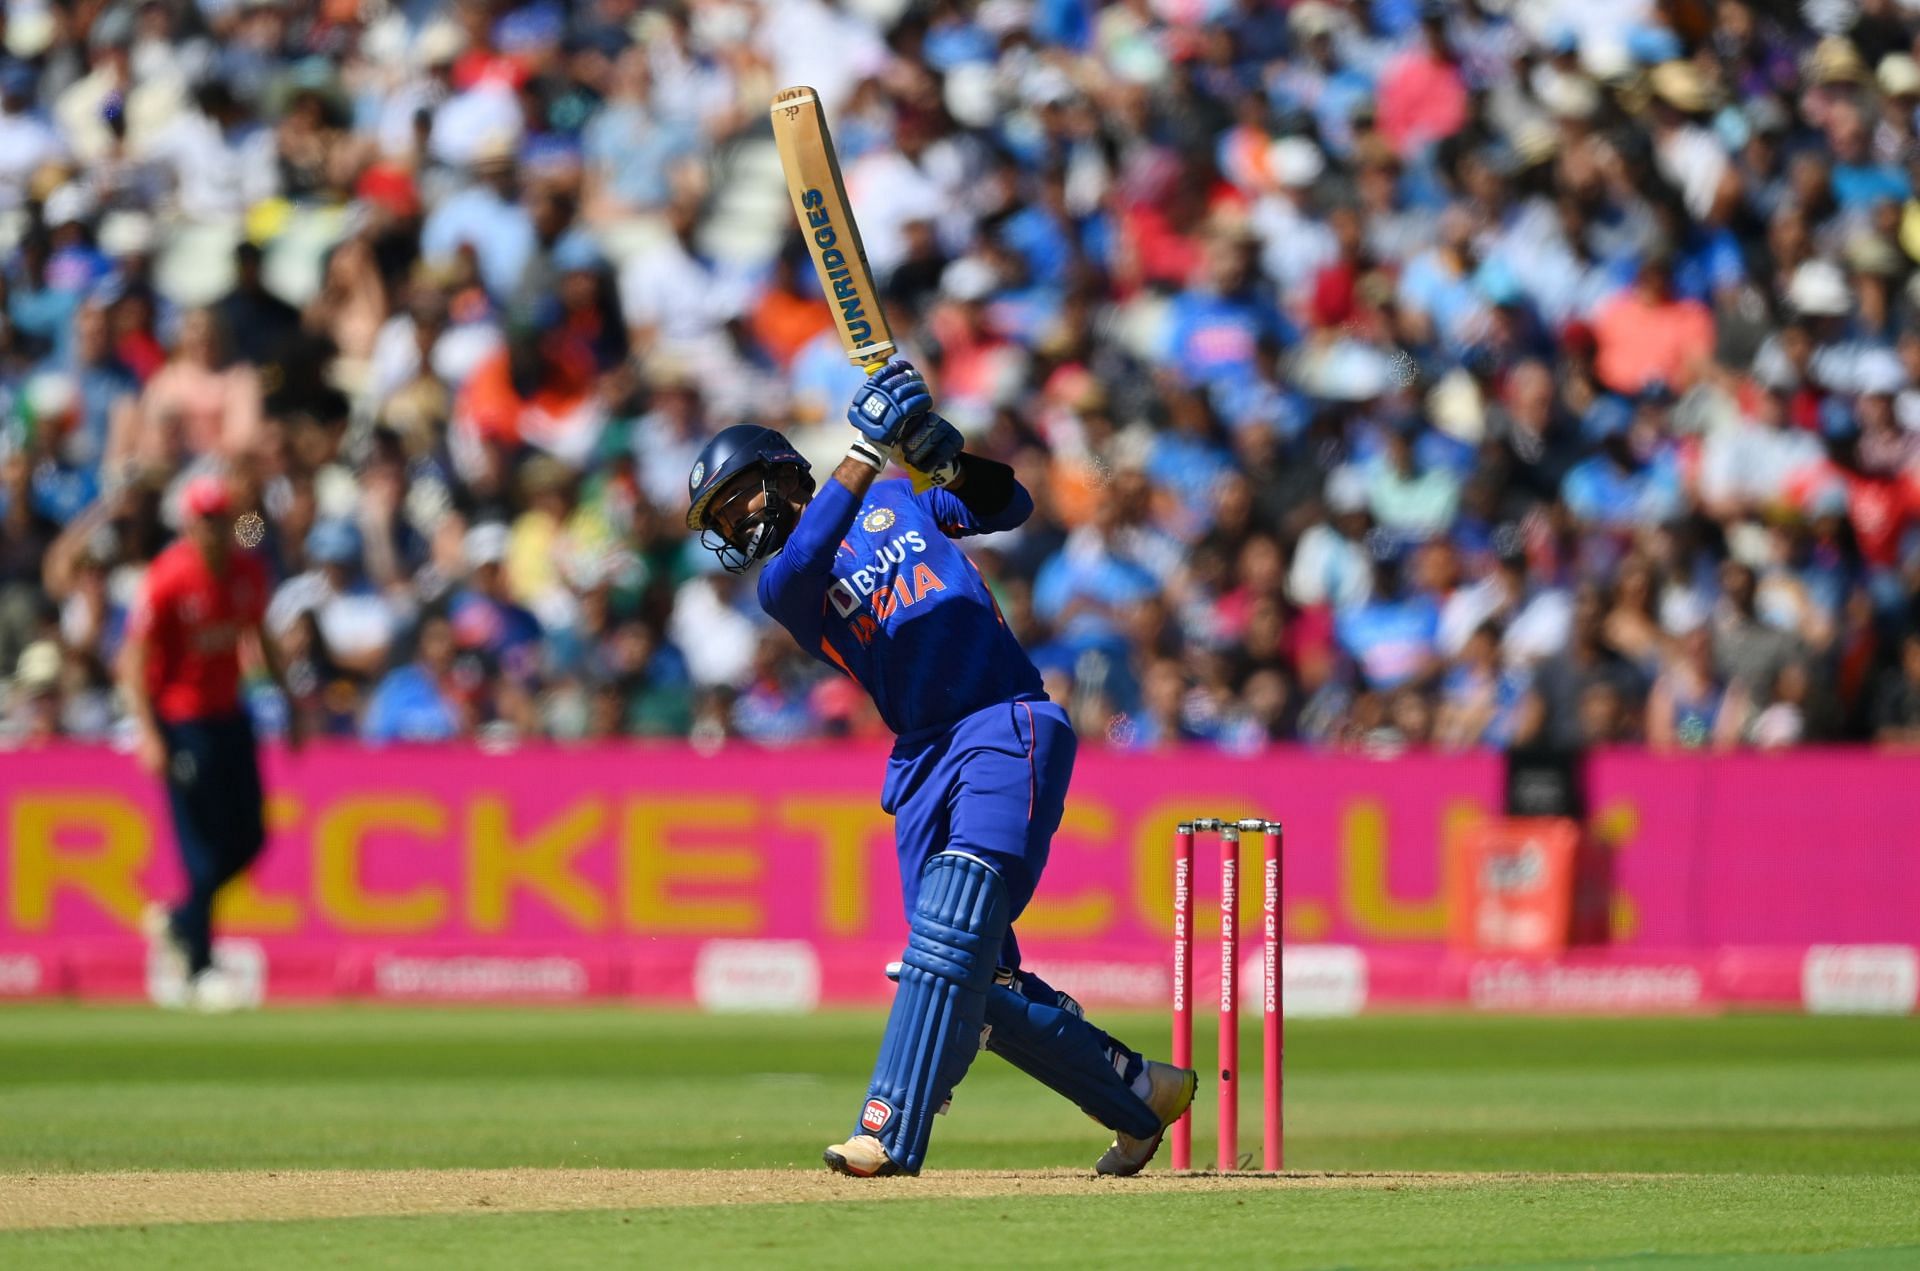 Dinesh Karthik has had mixed results as a finisher for Team India